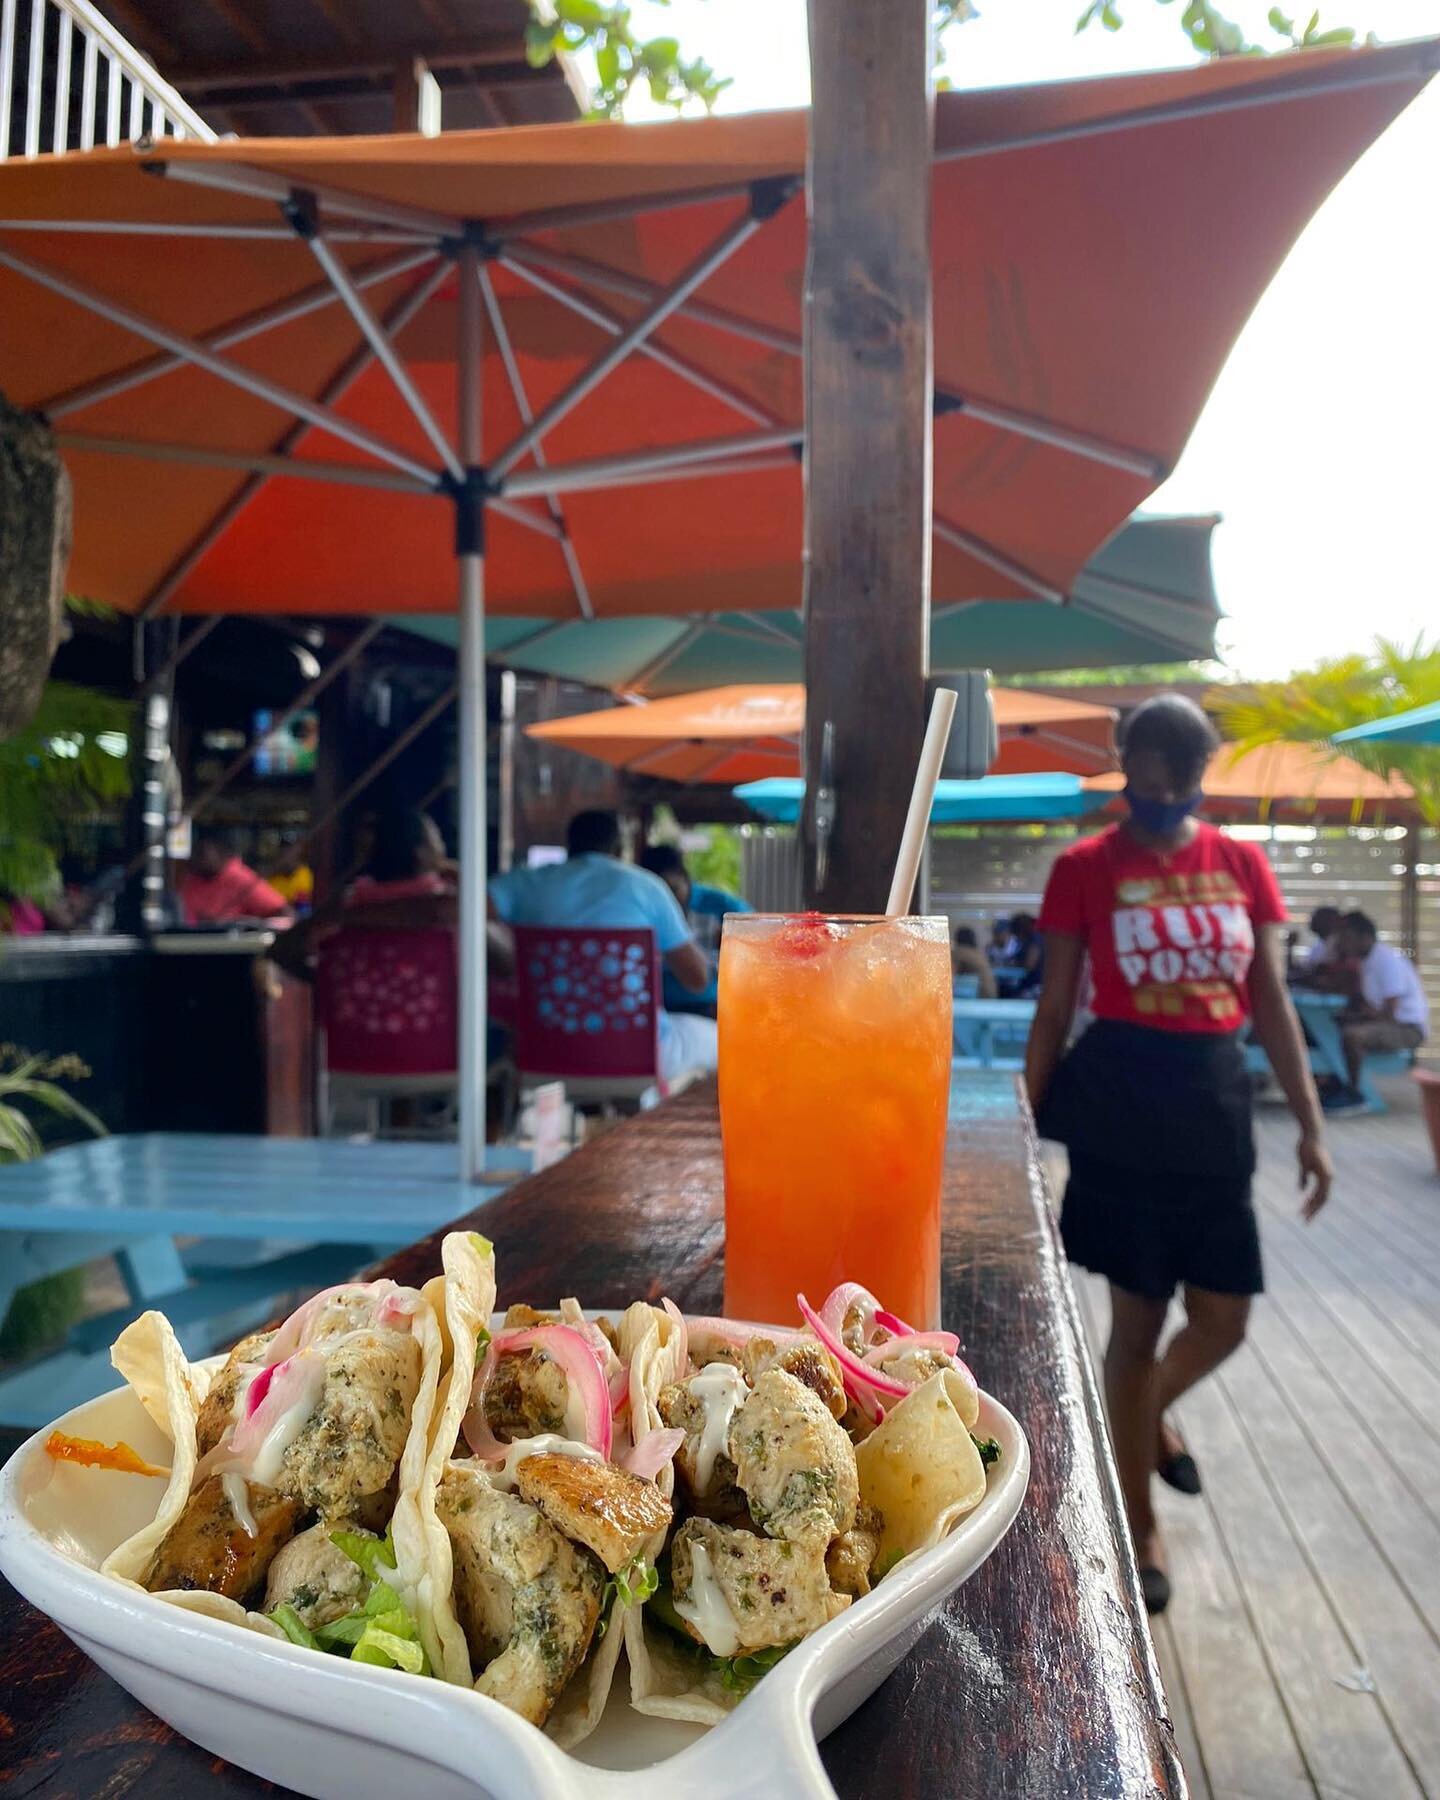 #mondays look better, beachside, under the Umbrellas 🏖 
.
Come #EatDrinkLime with us, and day of the week! ✨
.
#umbrellasbeachbar #bar #beachbar #beach #grandanse #tacos #cocktails #lunch #dinner #grenada #monday #mondaymotivation #lunchtime